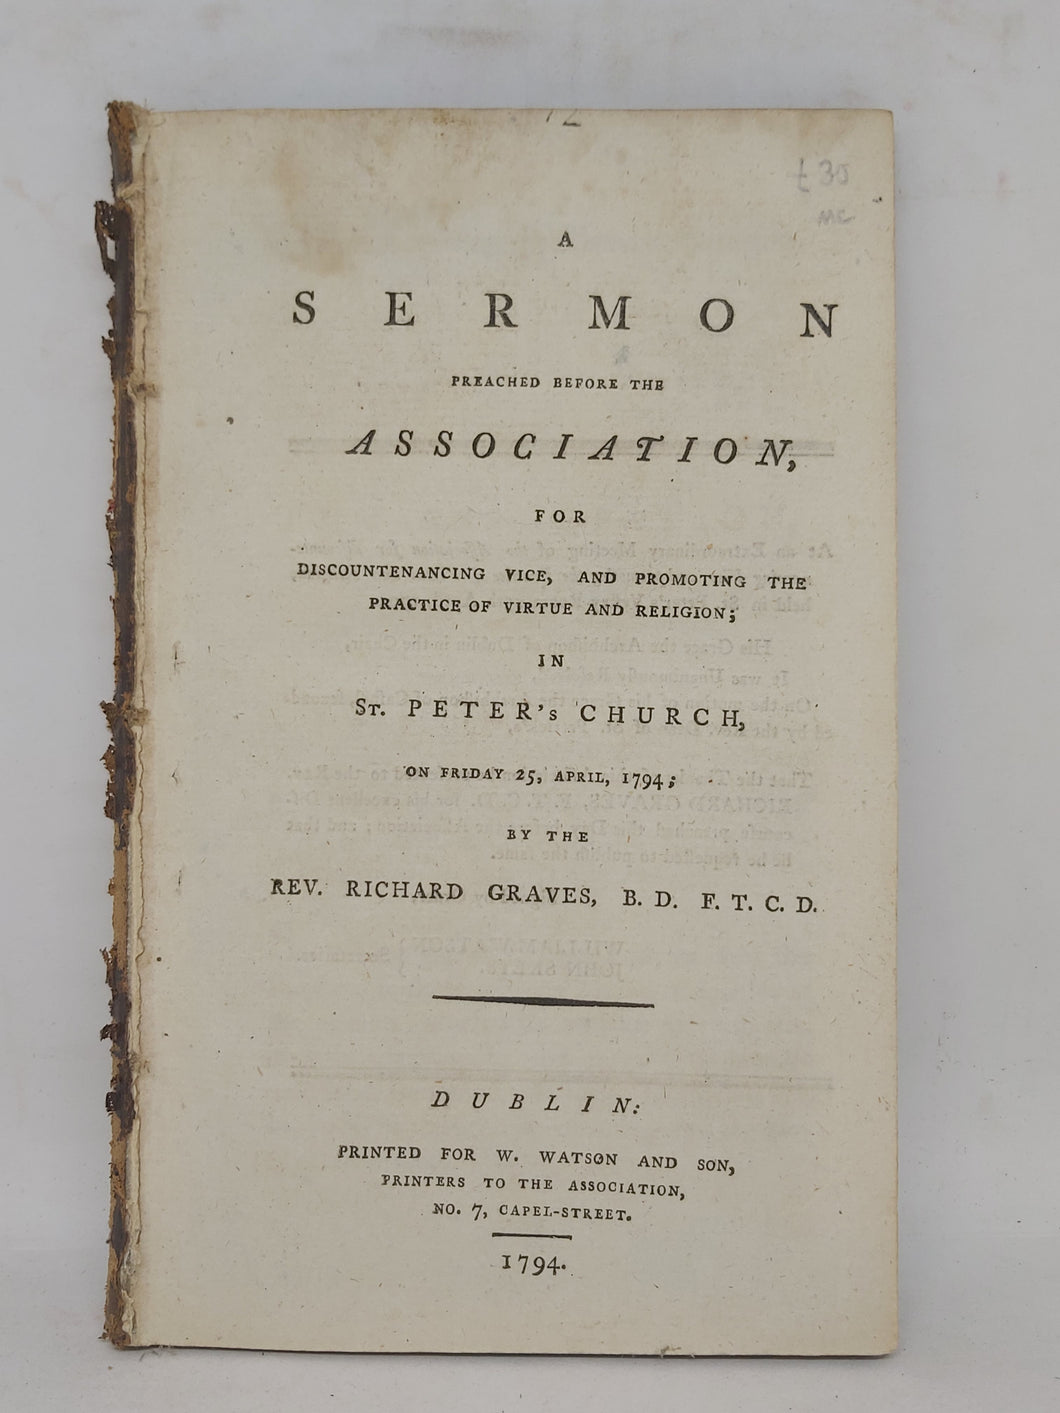 A sermon preached before the Association for Discountenancing Vice, and Promoting the Practice of Virtue and Religion: in St. Peter's church on Friday 25, April, 1794